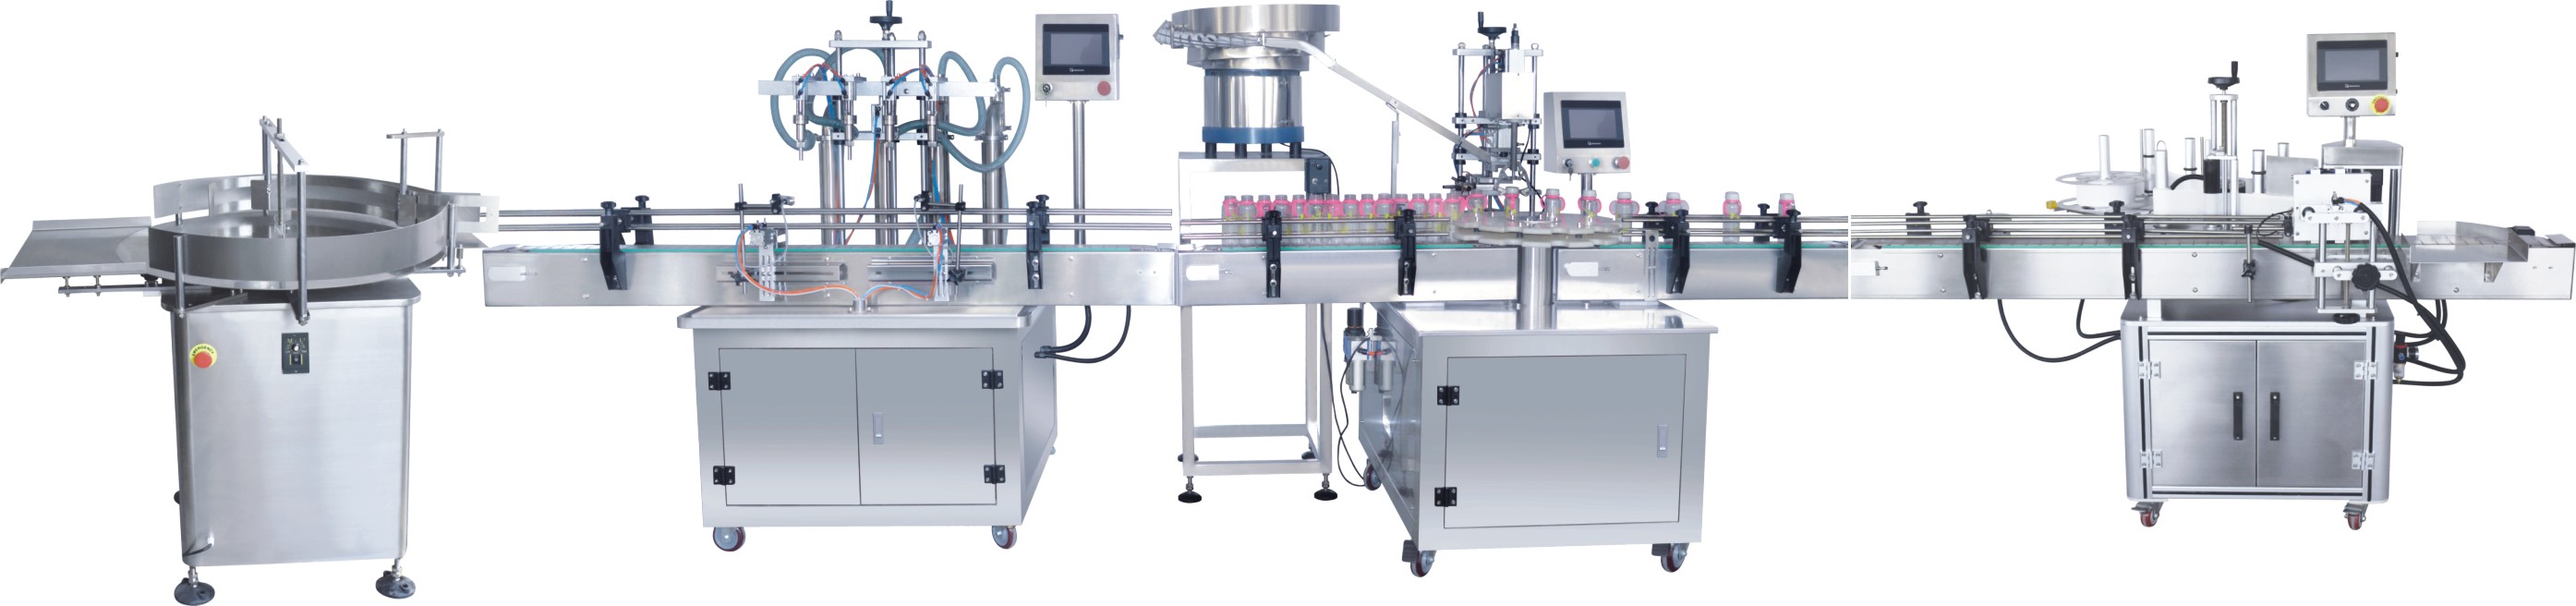 Customized Automatic Liquid Filling Line for You